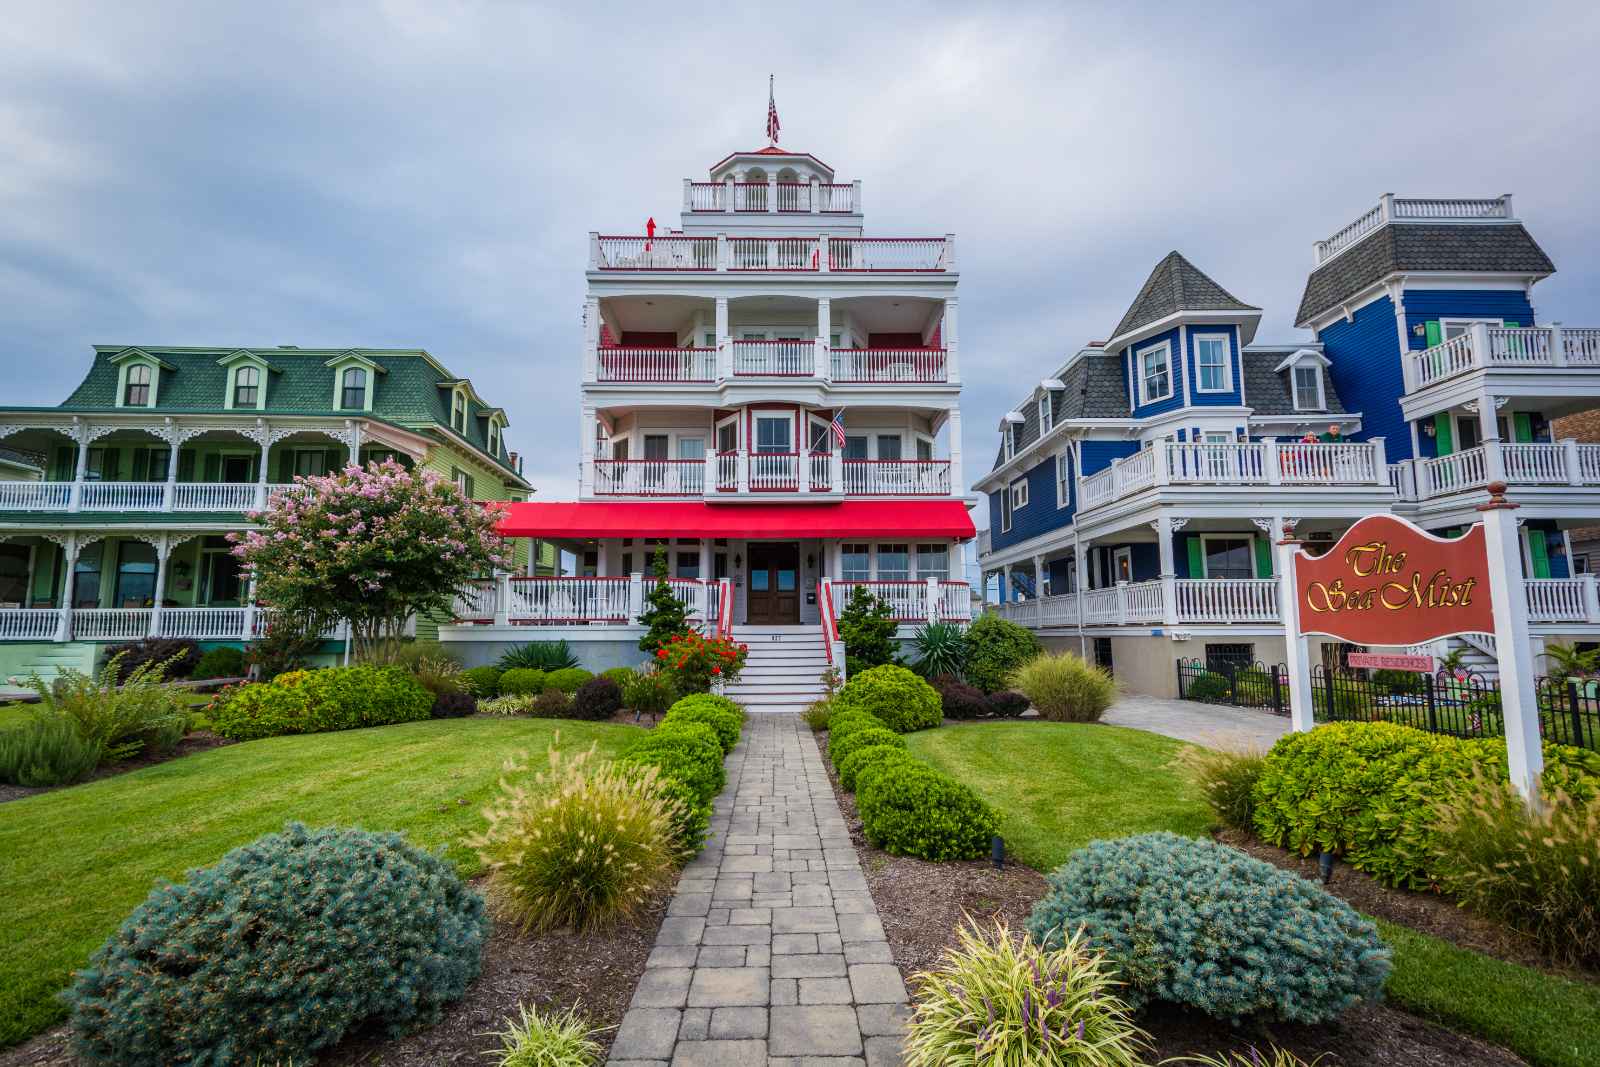 Best things to do in New Jersey Historic Cape May